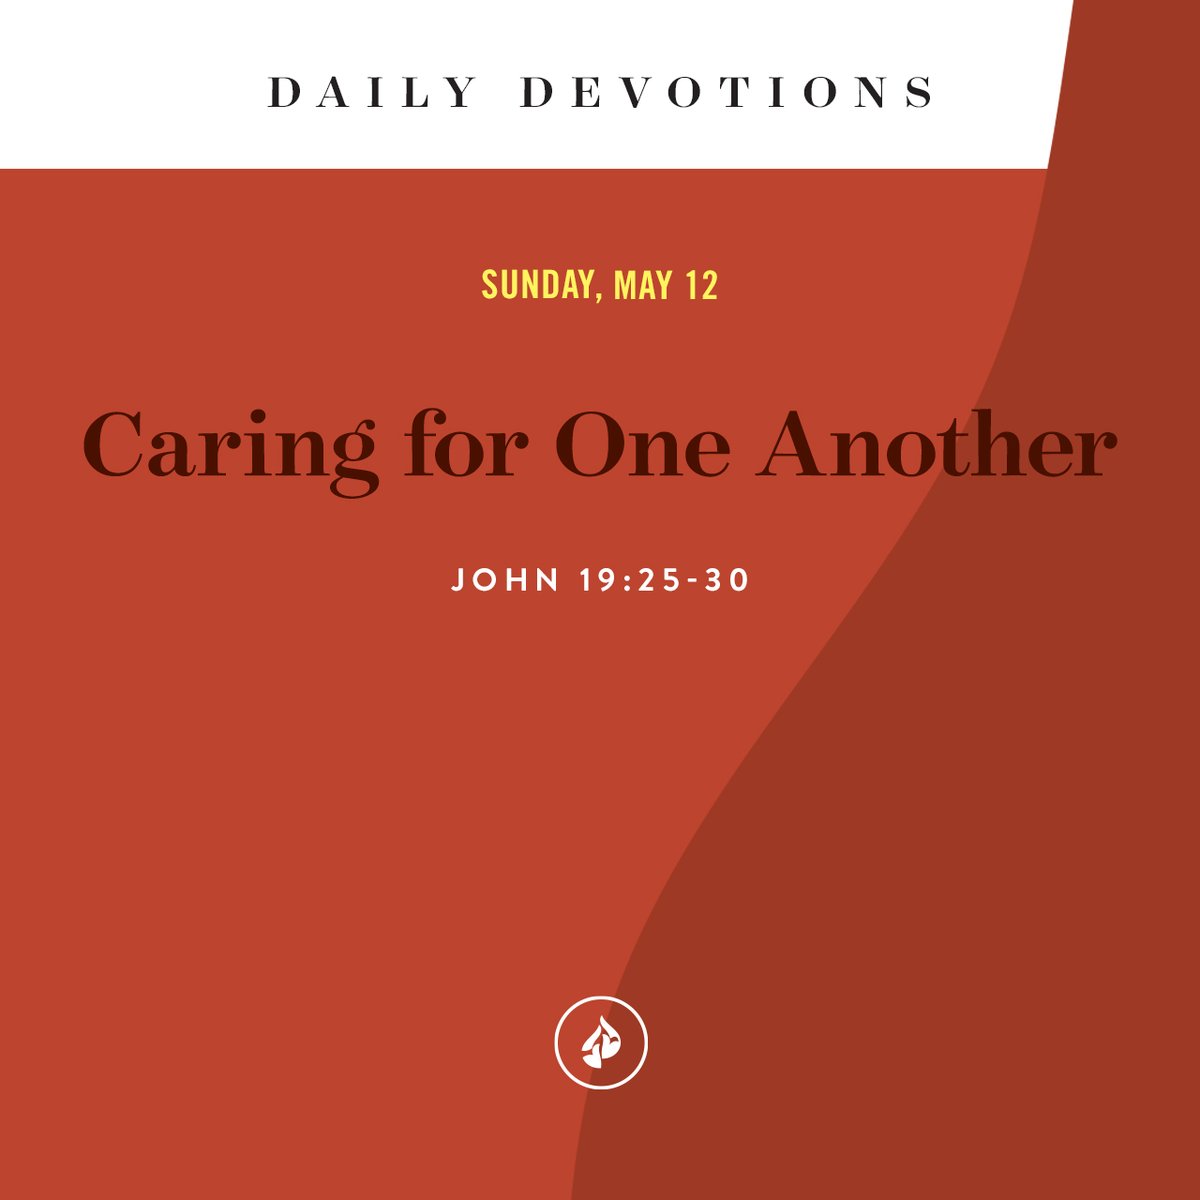 Ask God to show you how to minister to the people He’s brought into your life. #DailyDevo intouch.org/read/daily-dev…